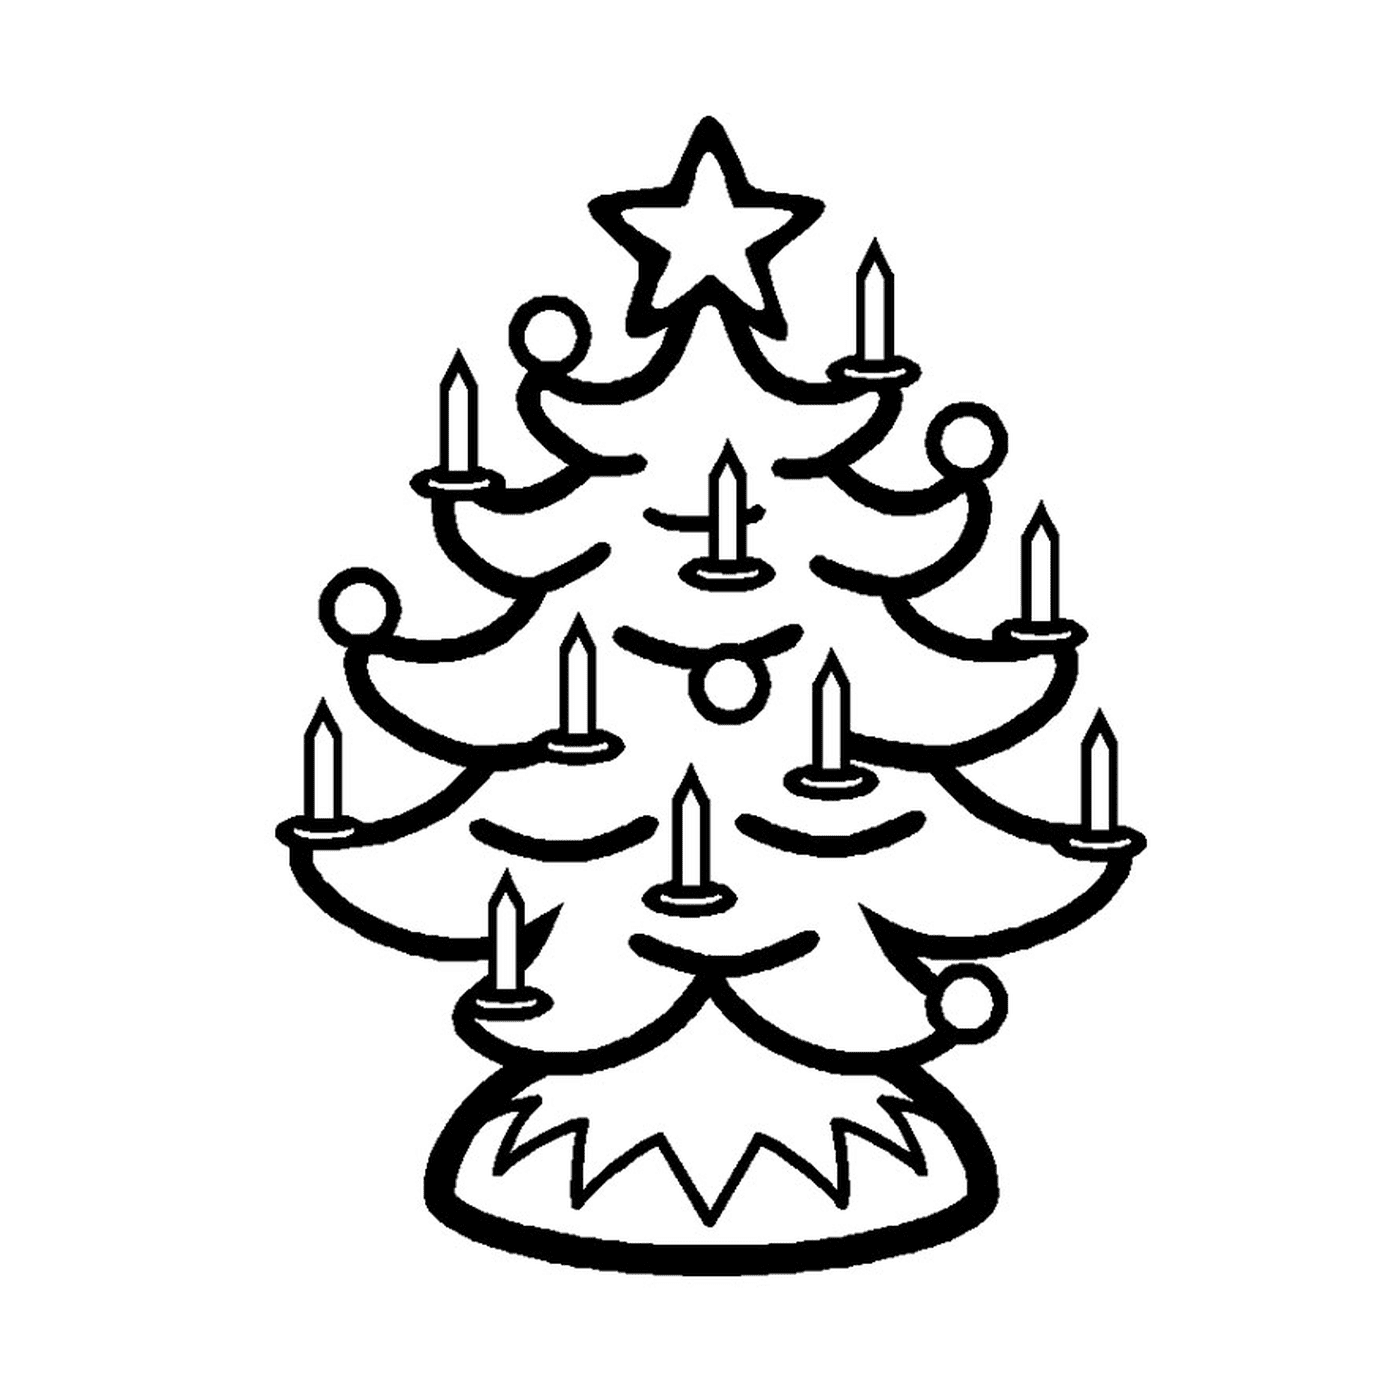  Christmas tree online with candles 